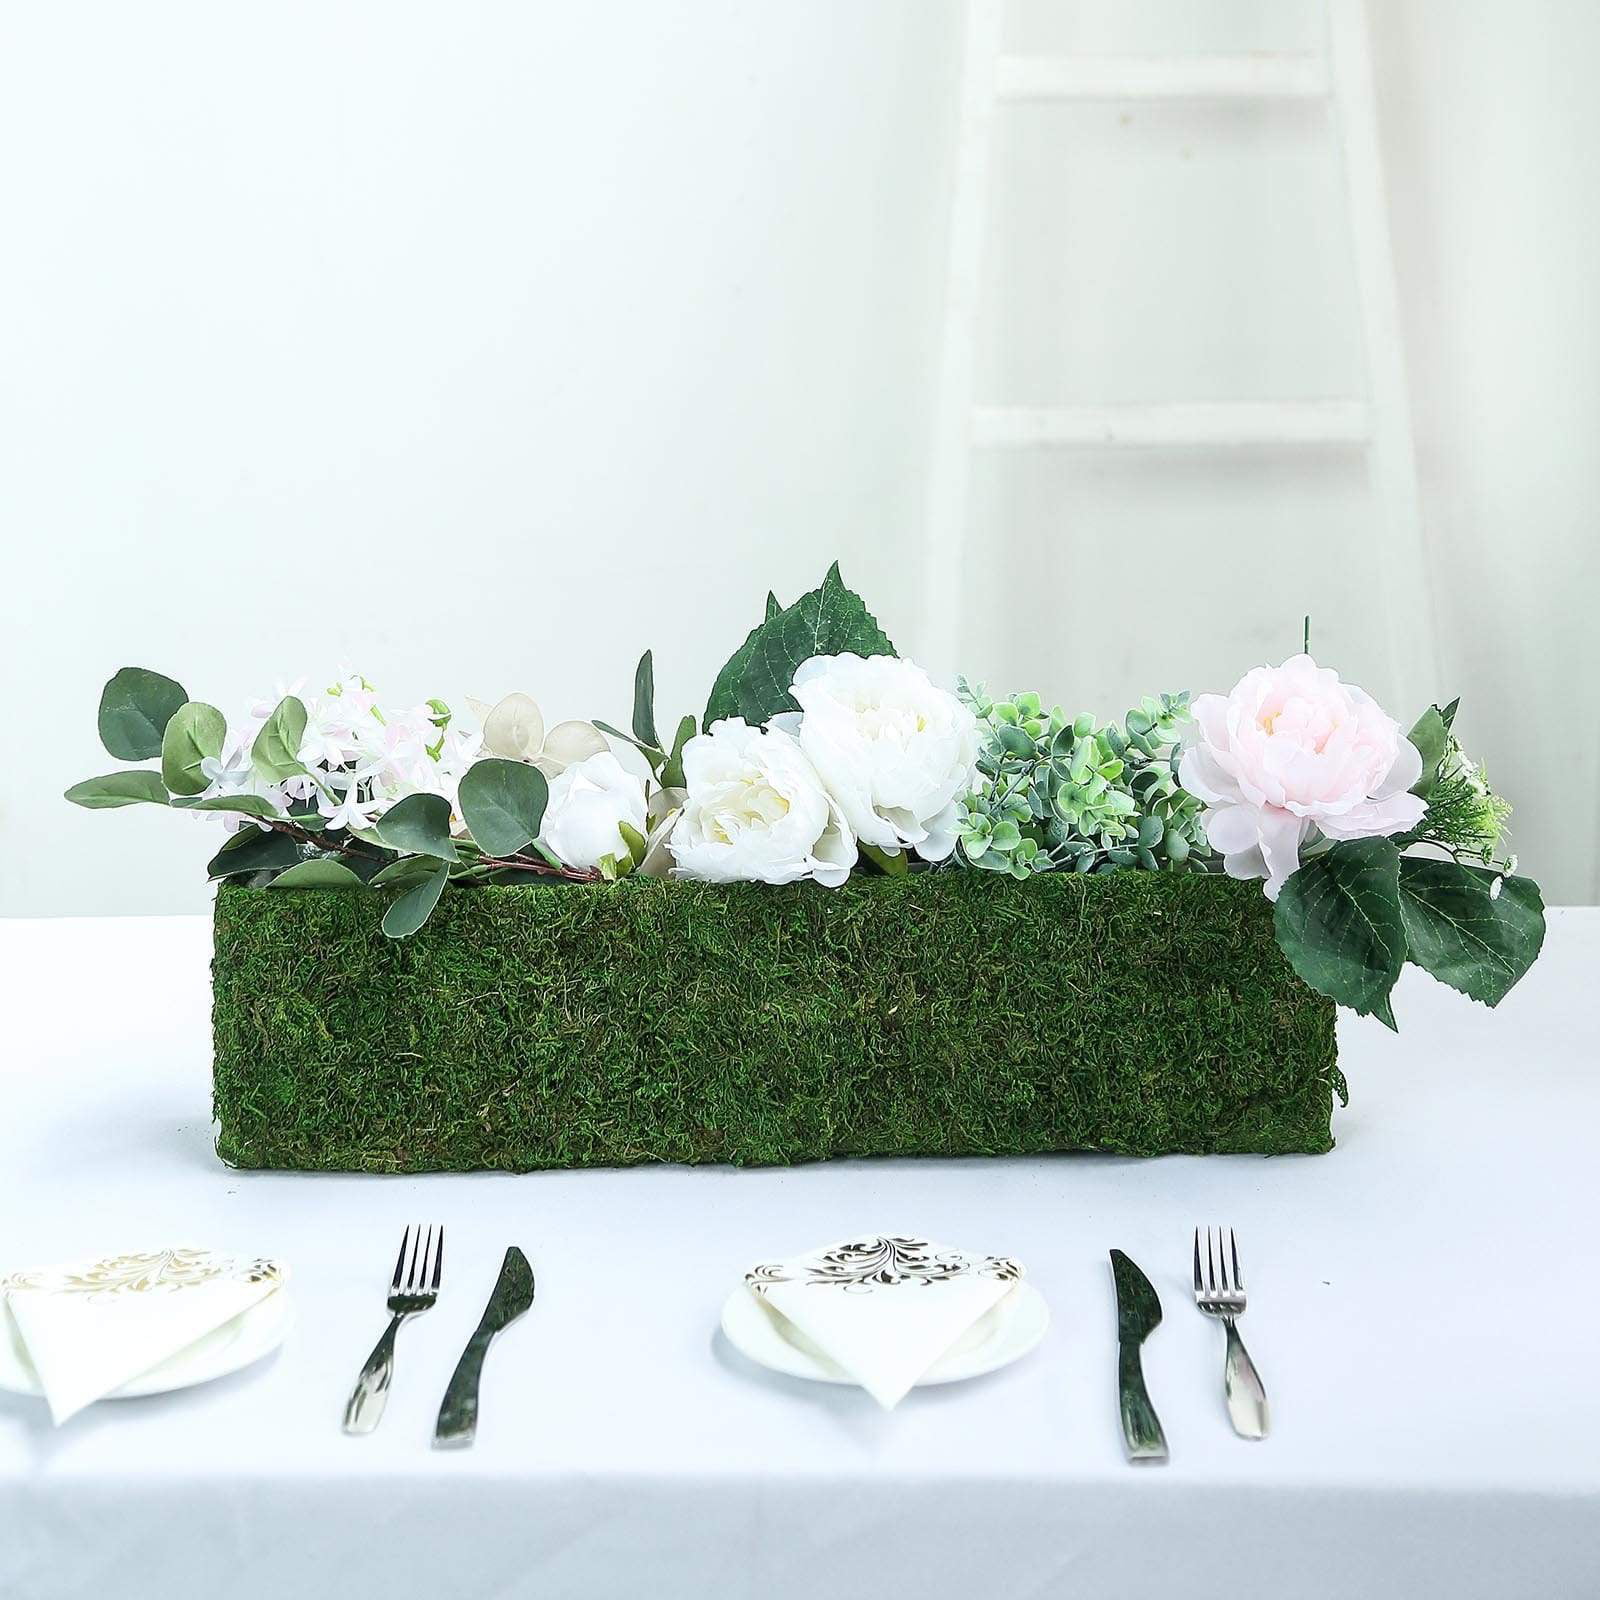 5 Green Natural Moss Rustic Square Planter Boxes Party Wedding Home Centerpieces 